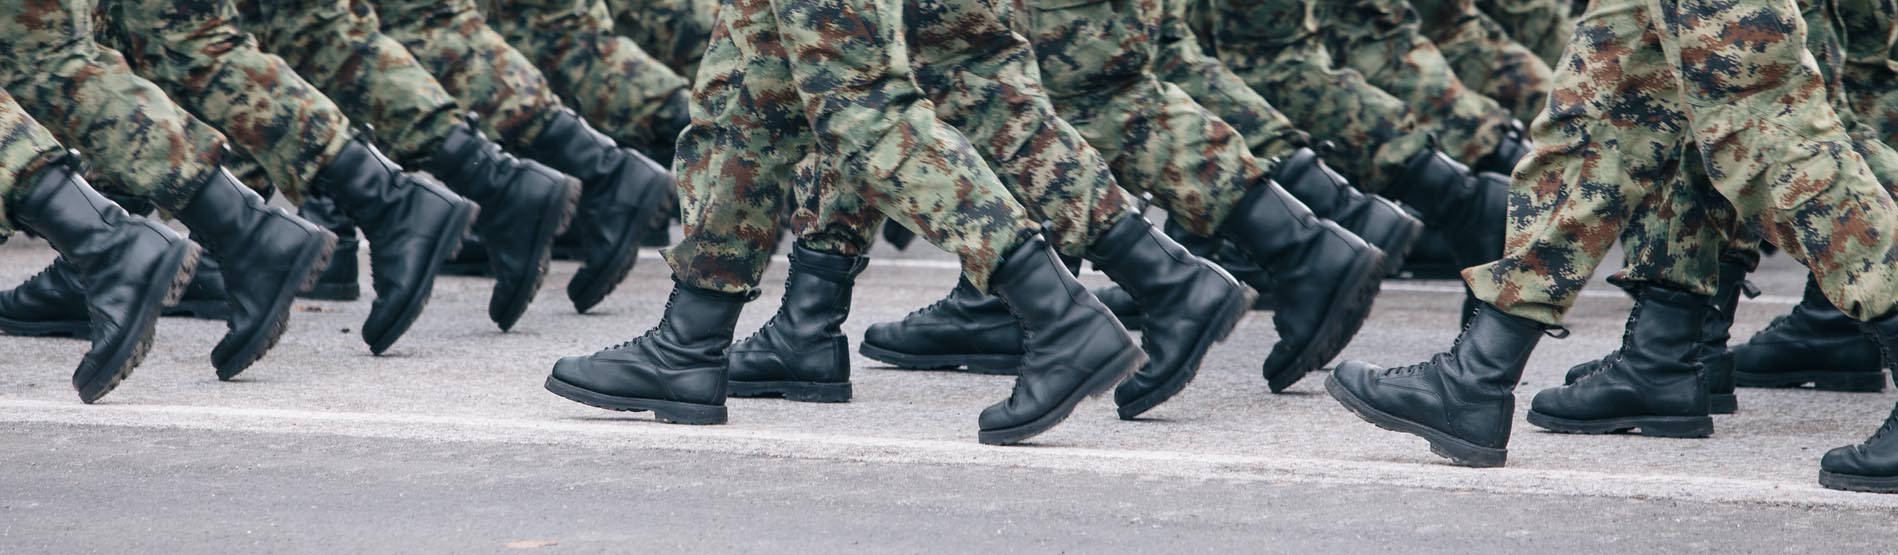 Image of army soldiers walking